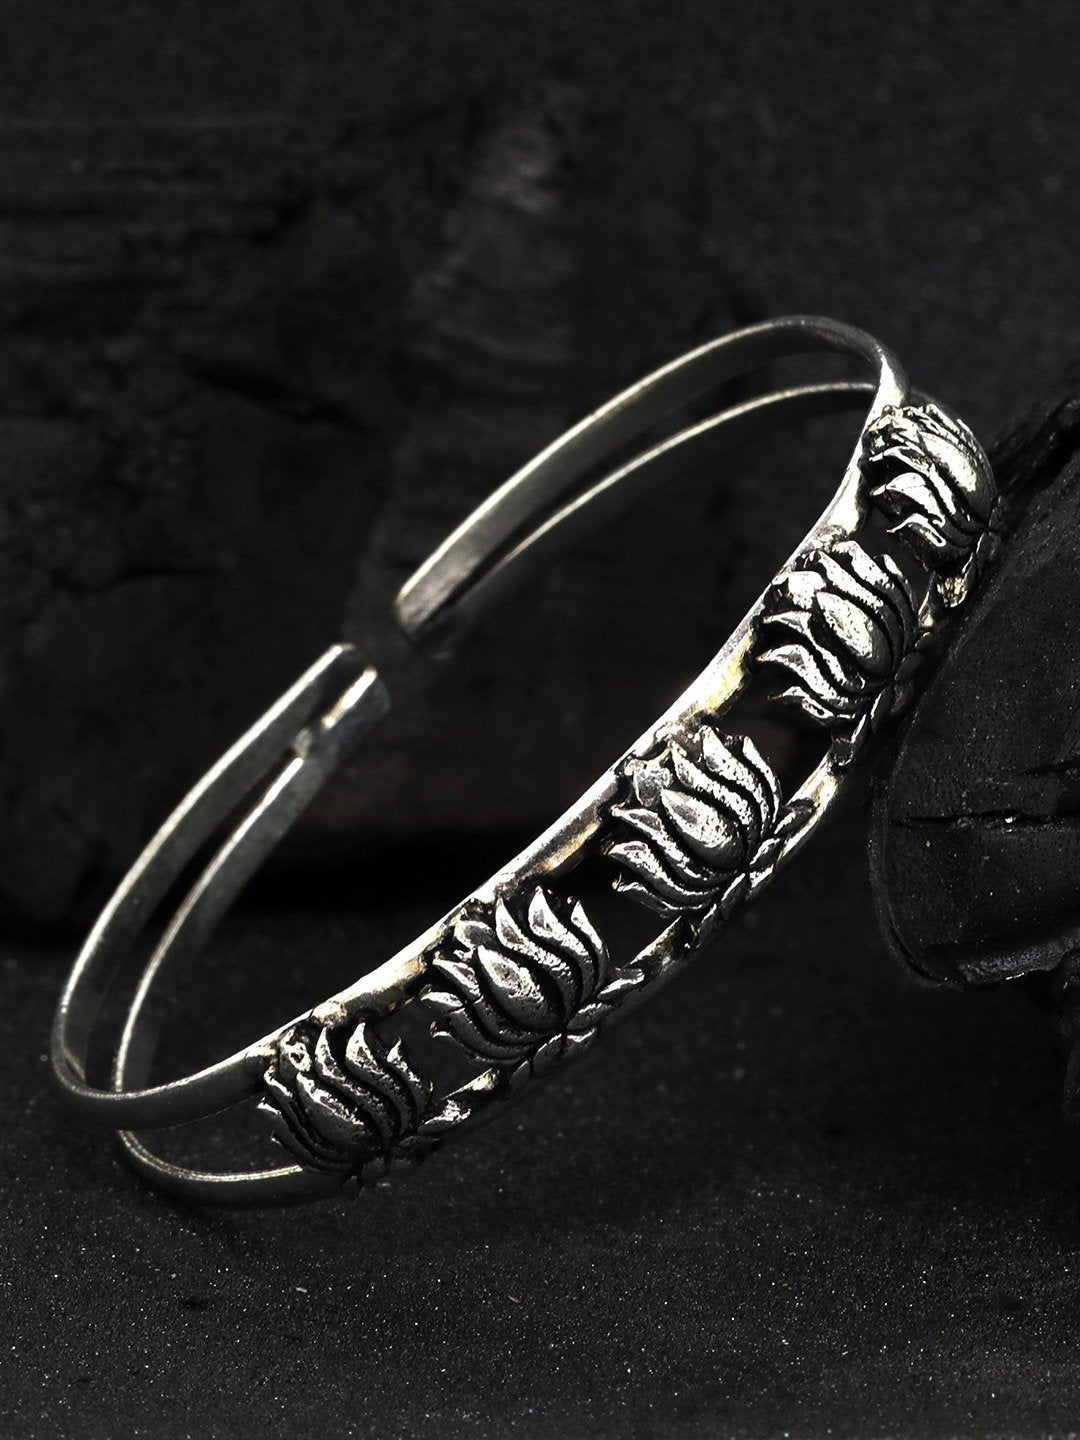 Women's Oxidized Silver-Plated Cuff Bracelet with floral pattern - Priyaasi